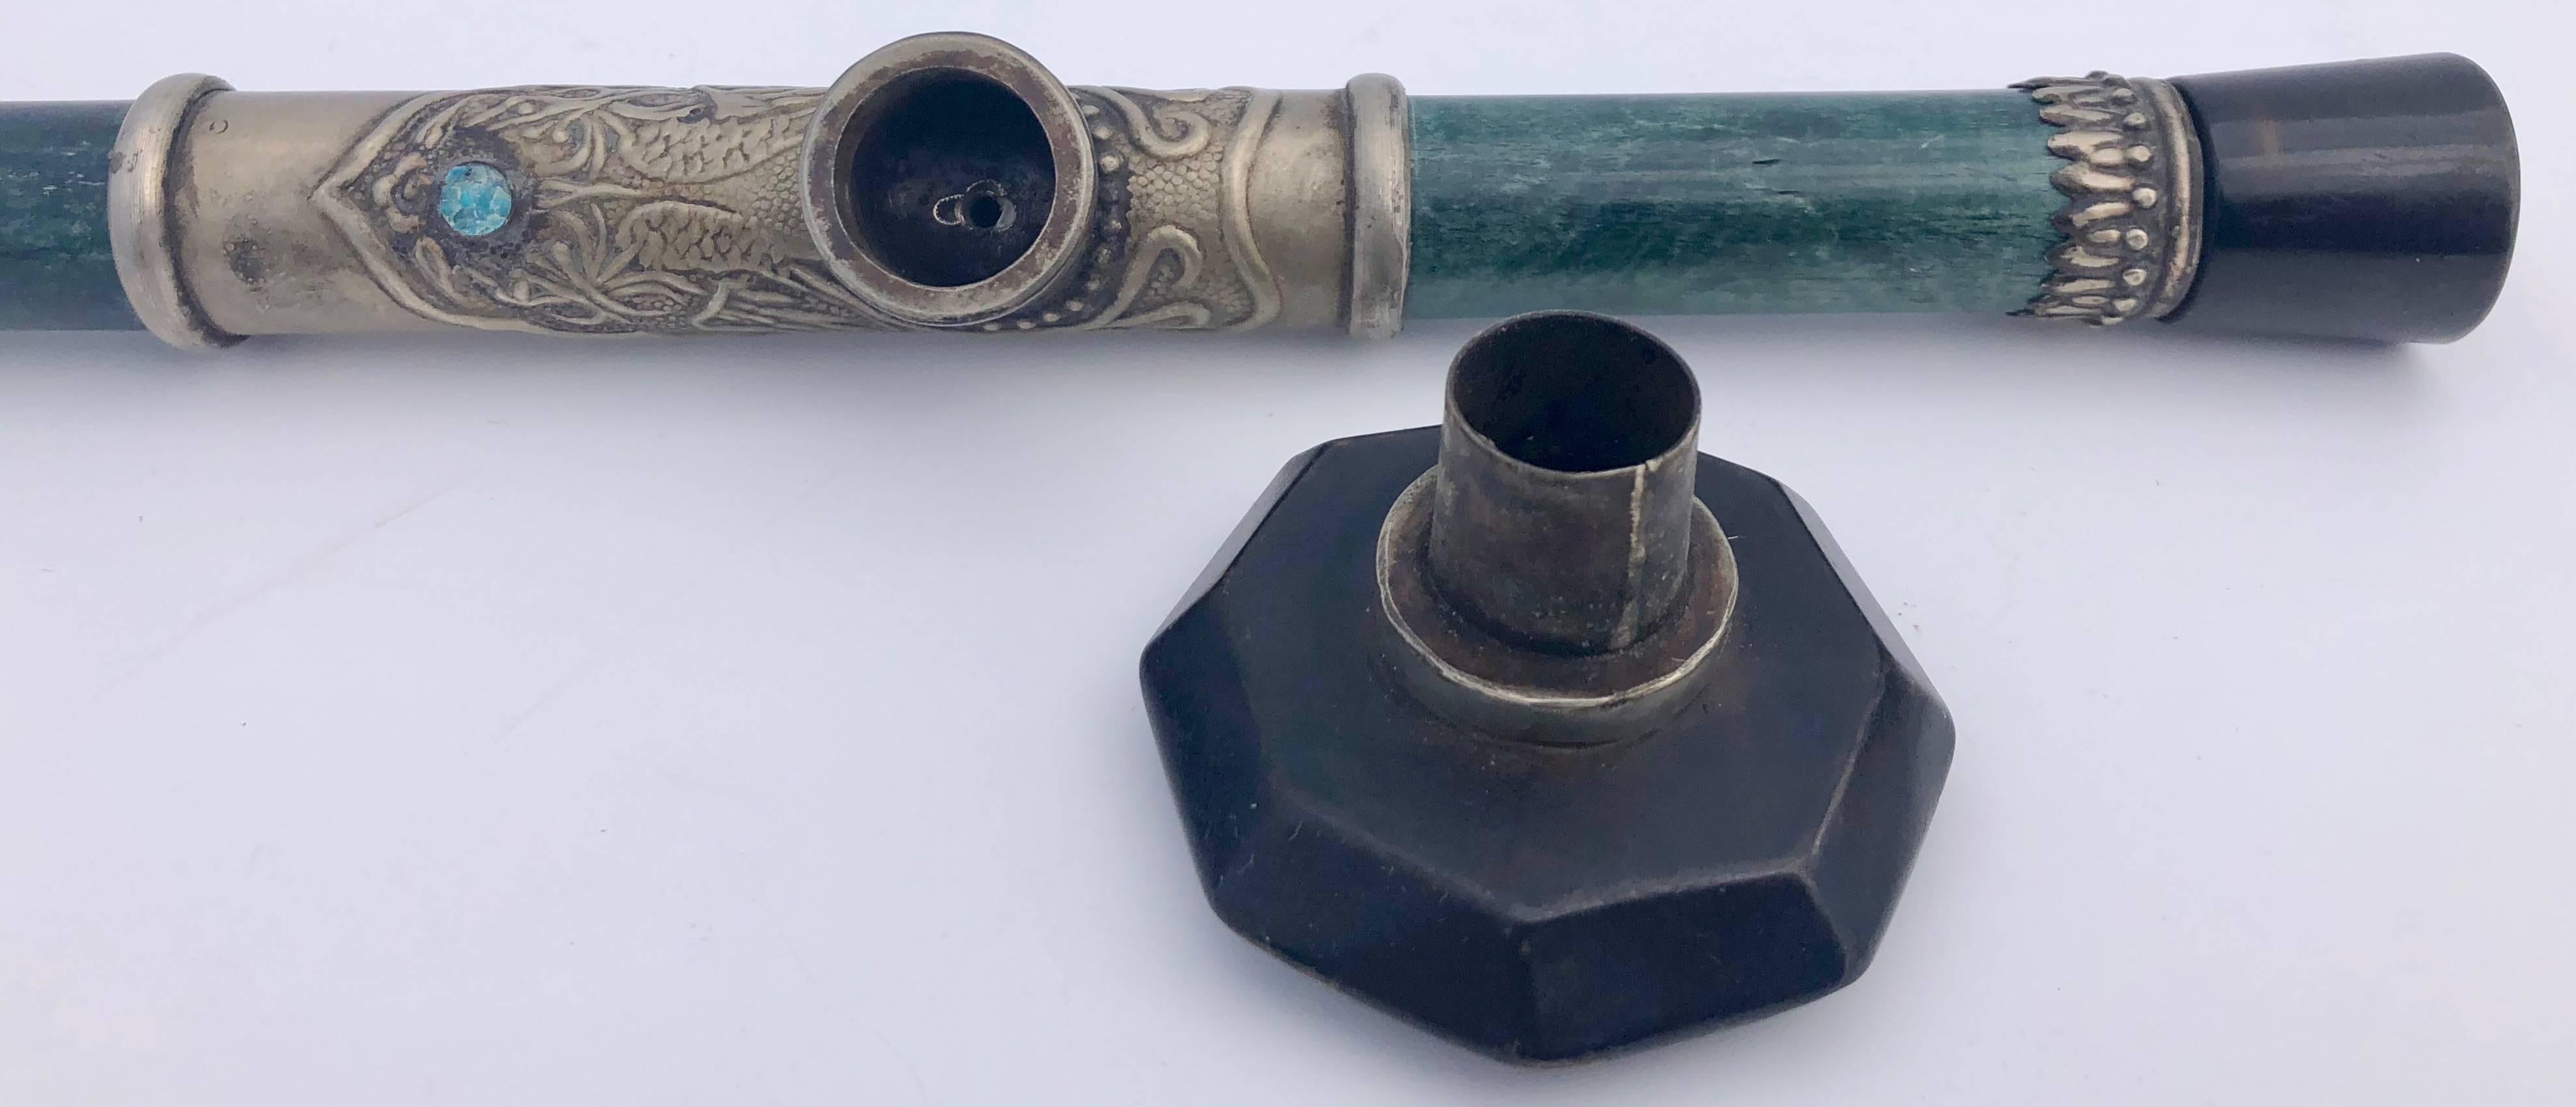 This beautiful Chinese jade opium pipe is from the 1700s. It has silver ring accents and a silver saddle. The bowl is hard stone as is the mouthpiece and cap. It is a lovely object to add to any collection.

Opium smoking began as a privilege of